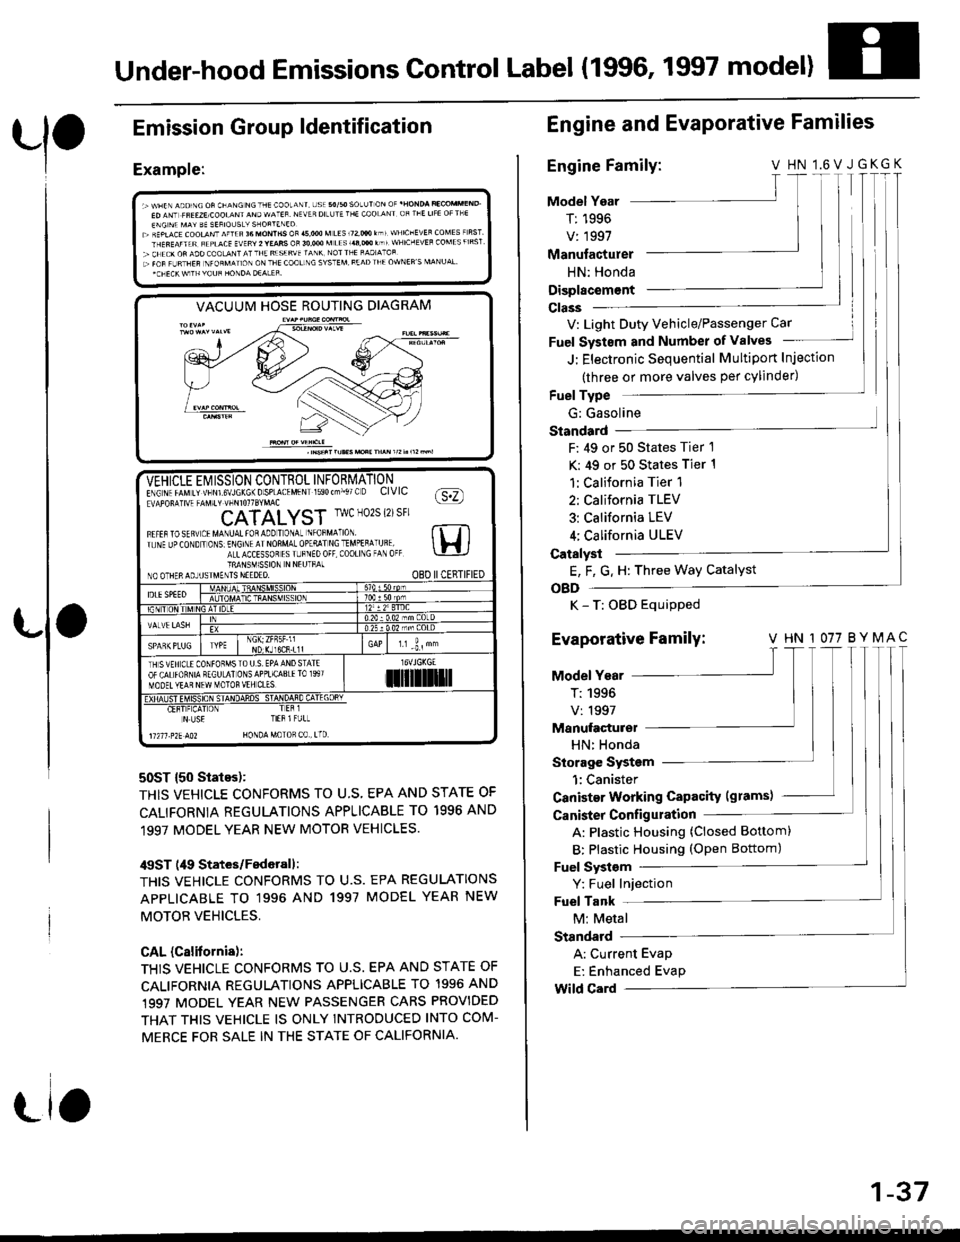 HONDA CIVIC 1997 6.G Workshop Manual Under-hood Emissions Control Label (1996, 1997 model)
Emission
Example:
Group ldentification
VACUUM HOSE ROUTING DIAGRAM
50ST {50 States):
THIS VEHICLE CONFORMS TO U.S, EPA AND STATE OF
CALIFORNIA REG